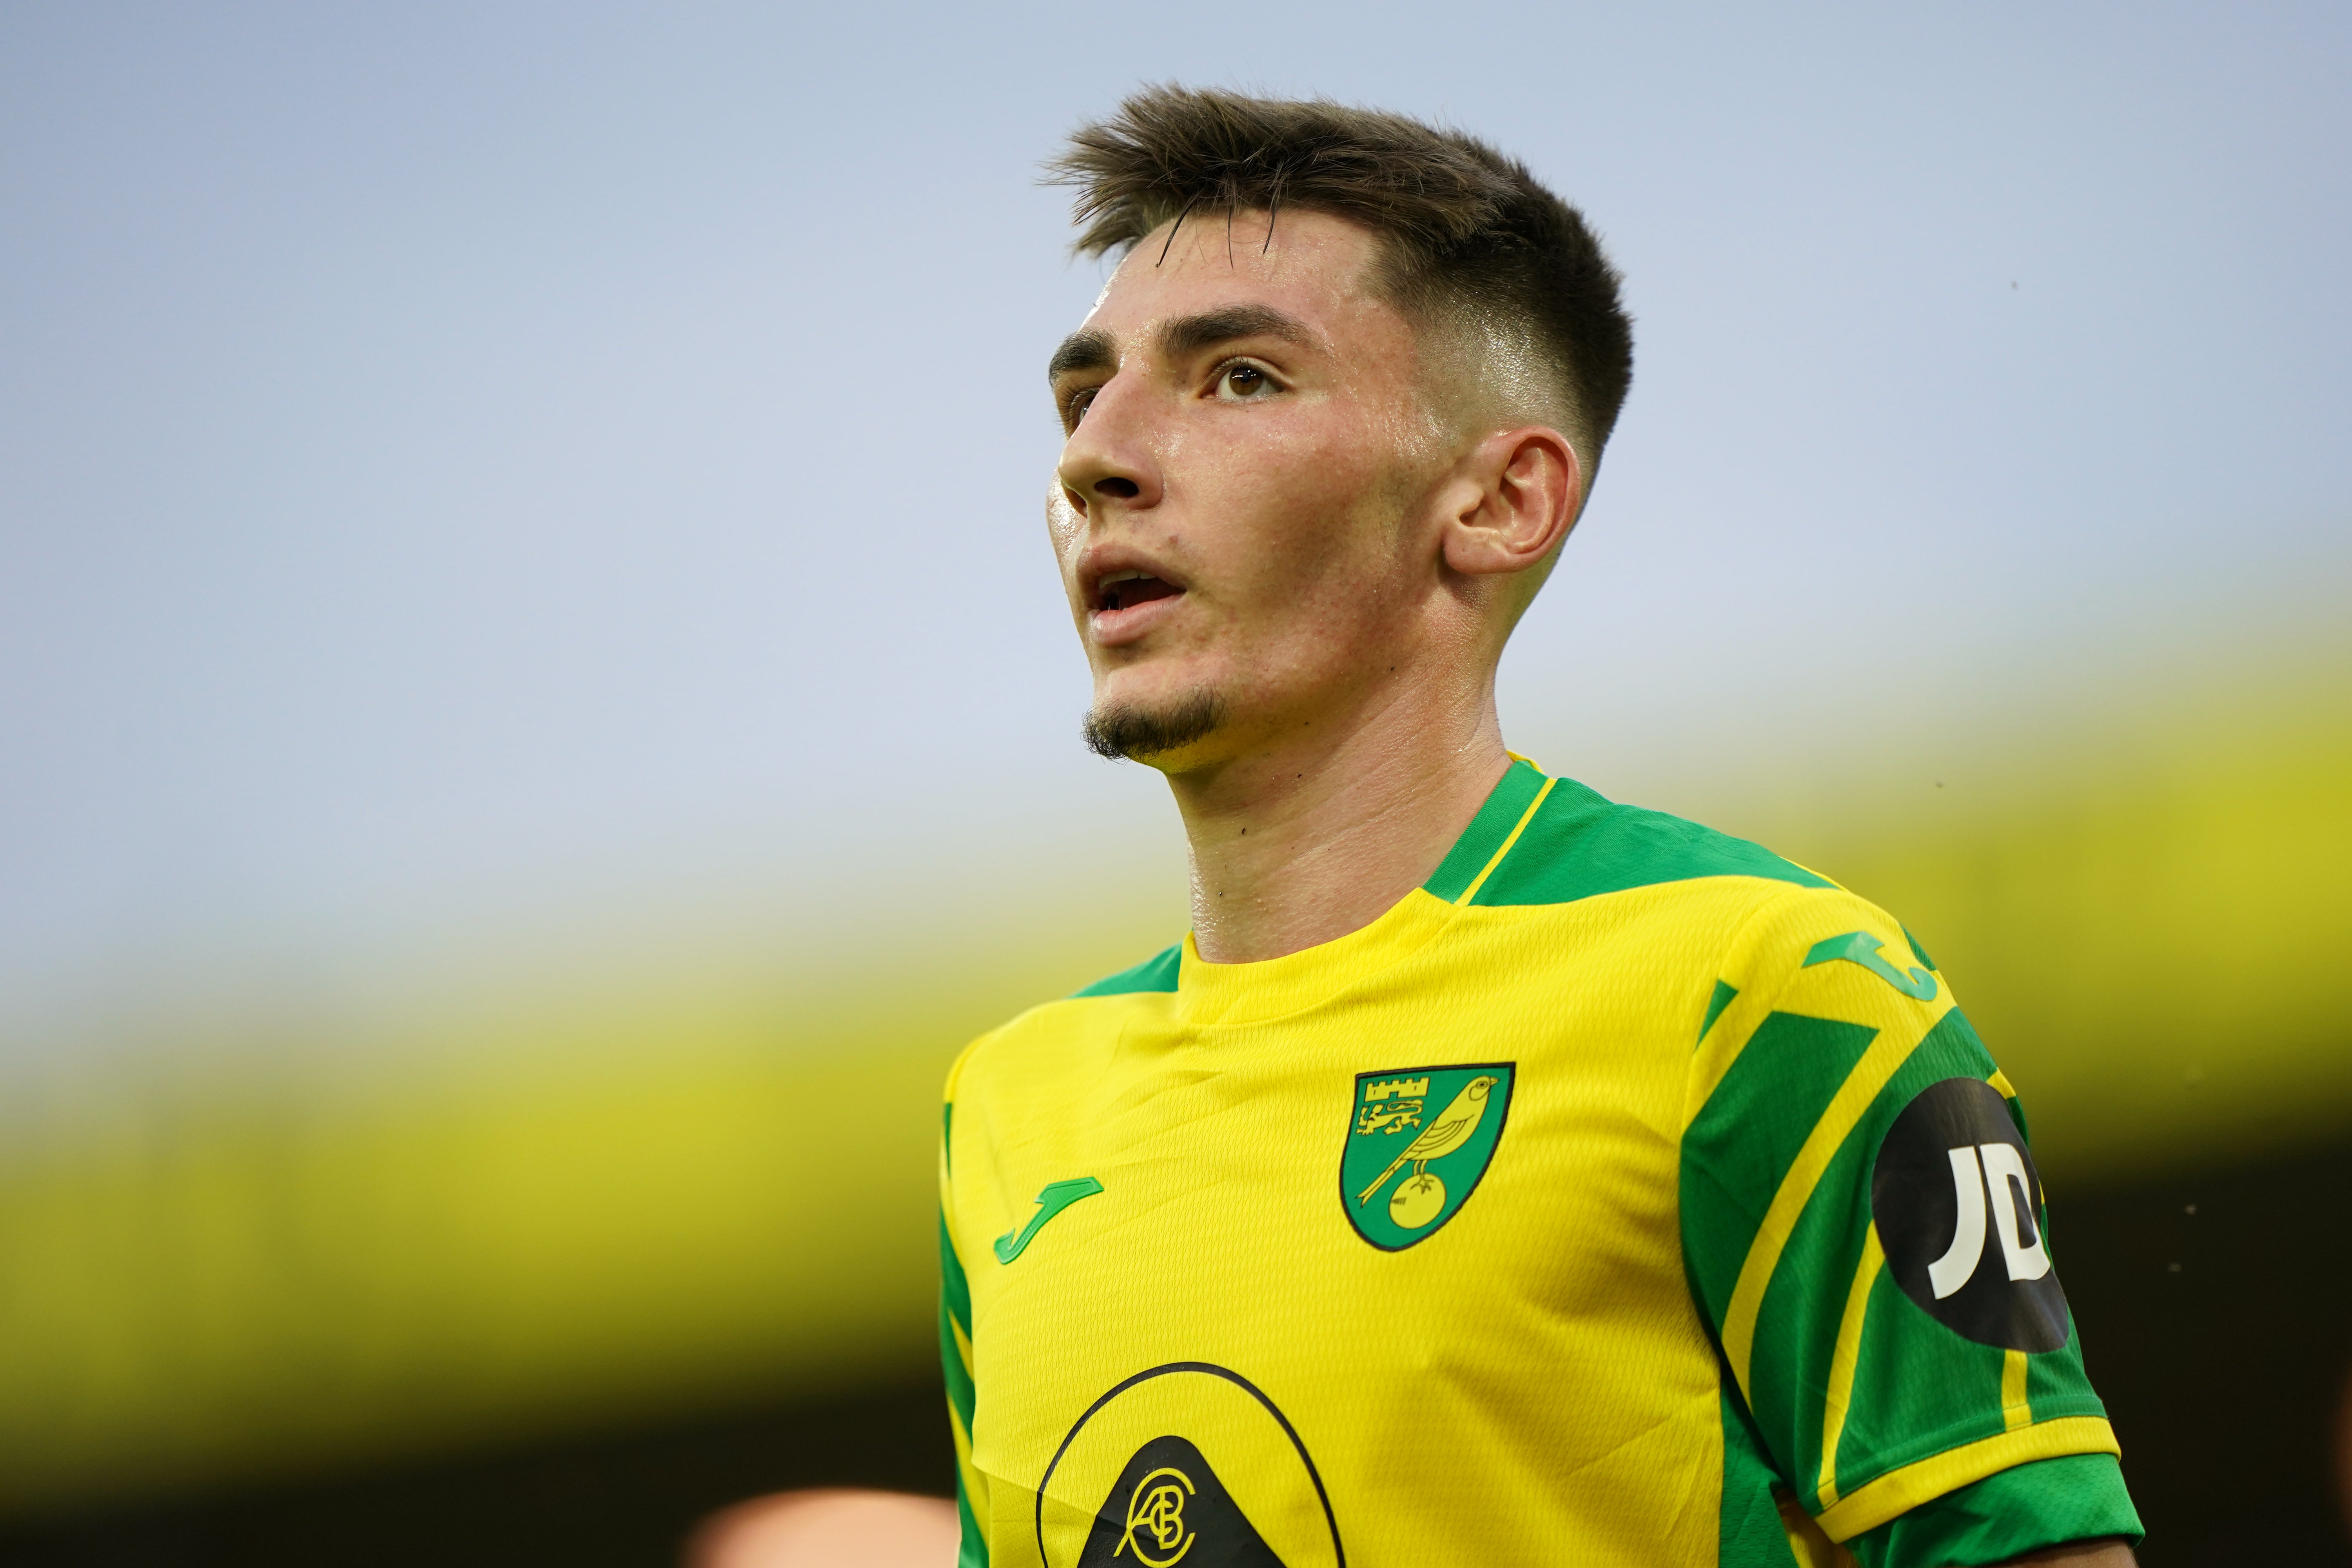 Billy Gilmour made is Norwich debut against Liverpool on Saturday after joining on loan from Chelsea (Joe Giddens/PA).